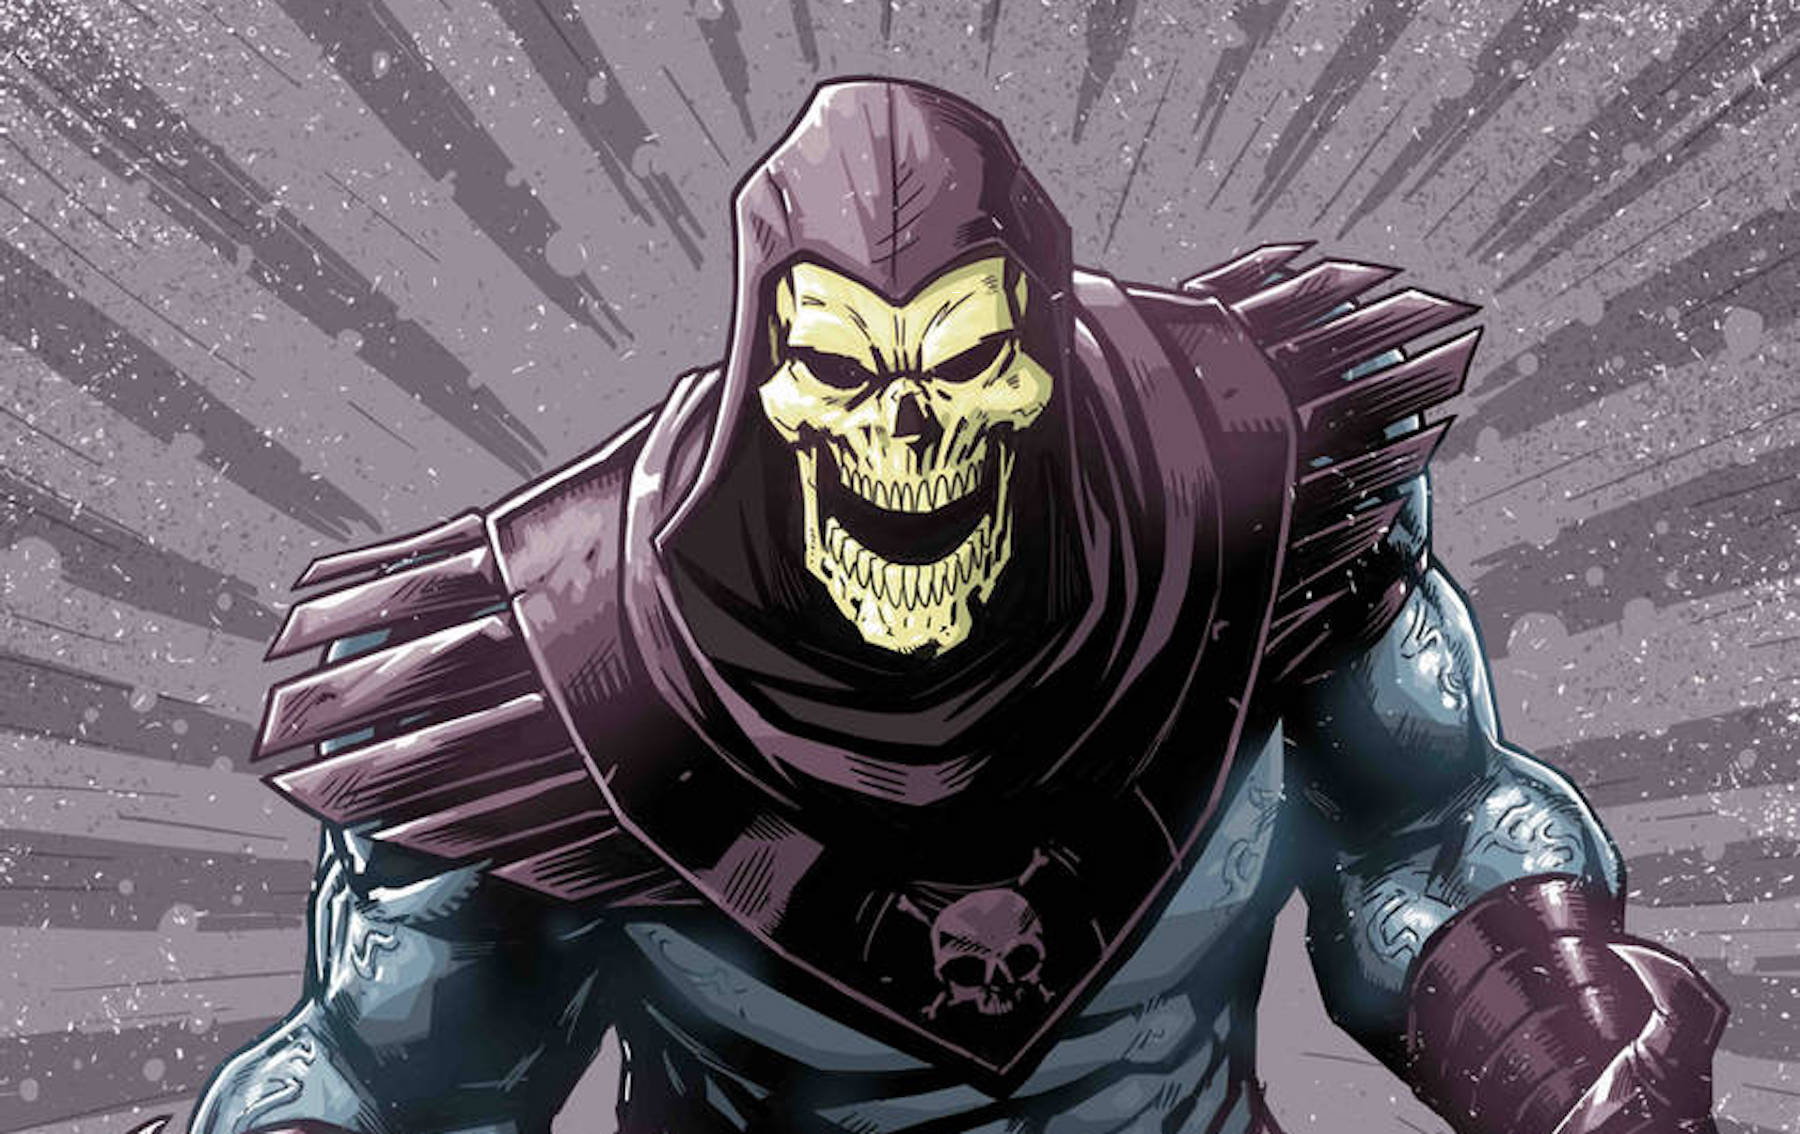 Skeletor from 80s cartoon He-Man and Masters of the Universe, posing menacingly against a purple and gray background. 